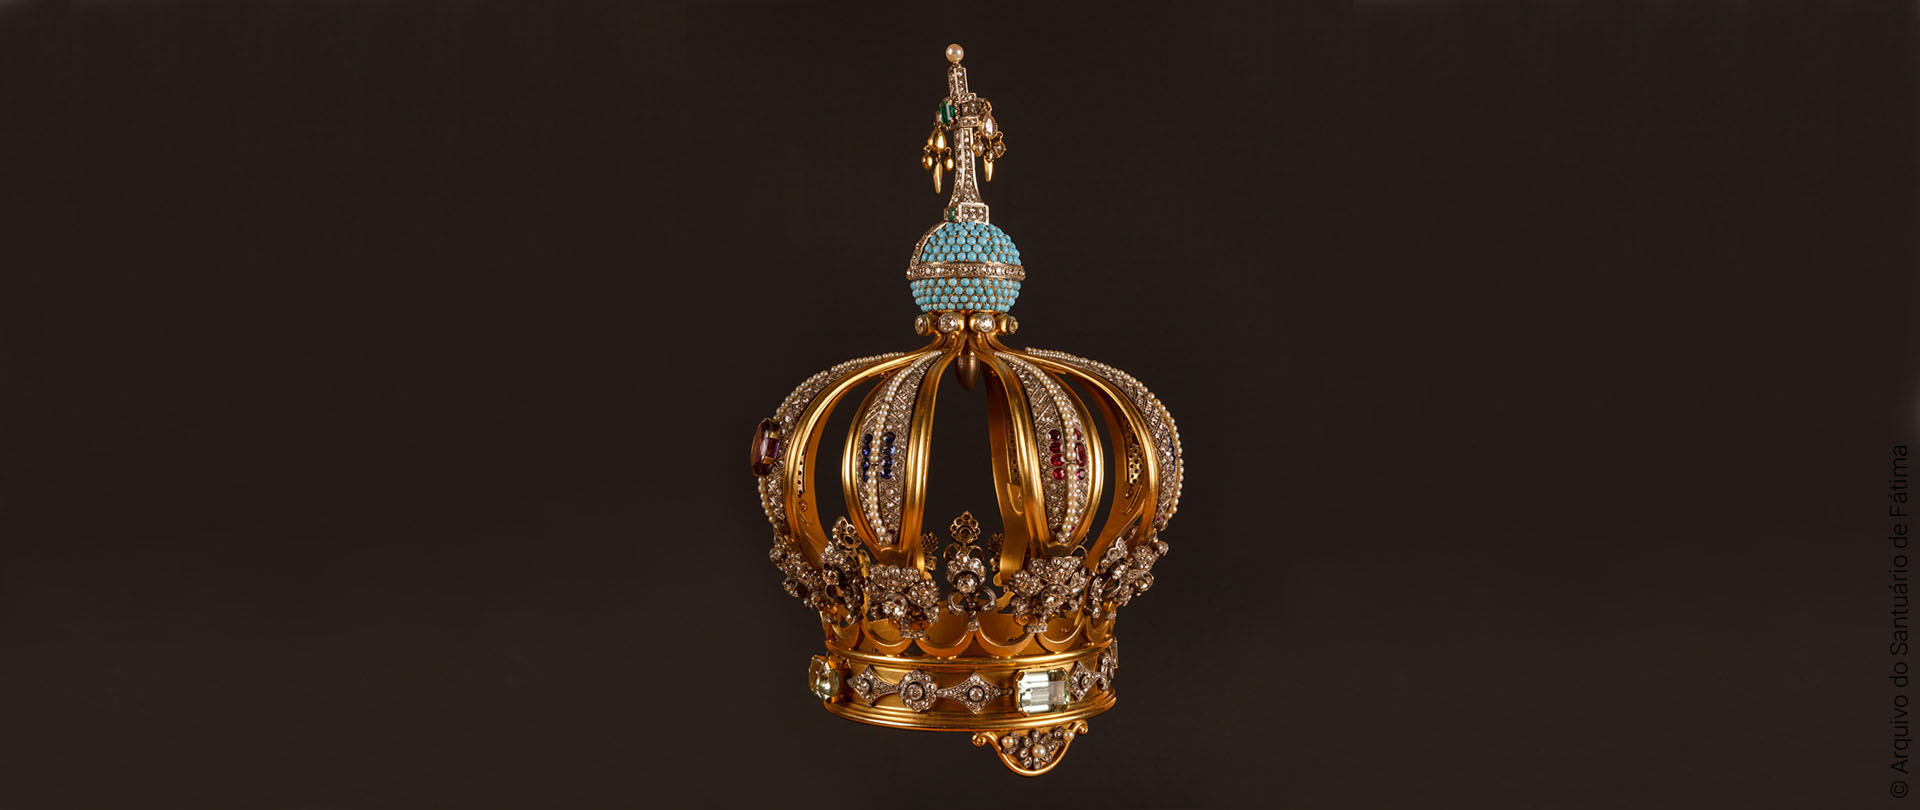 «Precious Crown of the Image of Our Lady of Fatima», c. 1948, Crown (gold, silver and precious stones - c. 2680 stones and 313 pearls - of jewelry donated to the Virgin as a thanksgiving for her protection to the country during World War II. In 1984 the projectile that shot Pope John Paul II on May 13, 1981 it was integrated into the crown, as a relic of contact). Produced by Casa Leitão &amp; Irmão and the projectile was inserted by Ourivesaria Gomes da Póvoa. Height: 24 cm, maximum Ø: 14.89 cm, Ø of the lower rim: 10.48 cm. Photo: Shrine of Fátima Archive